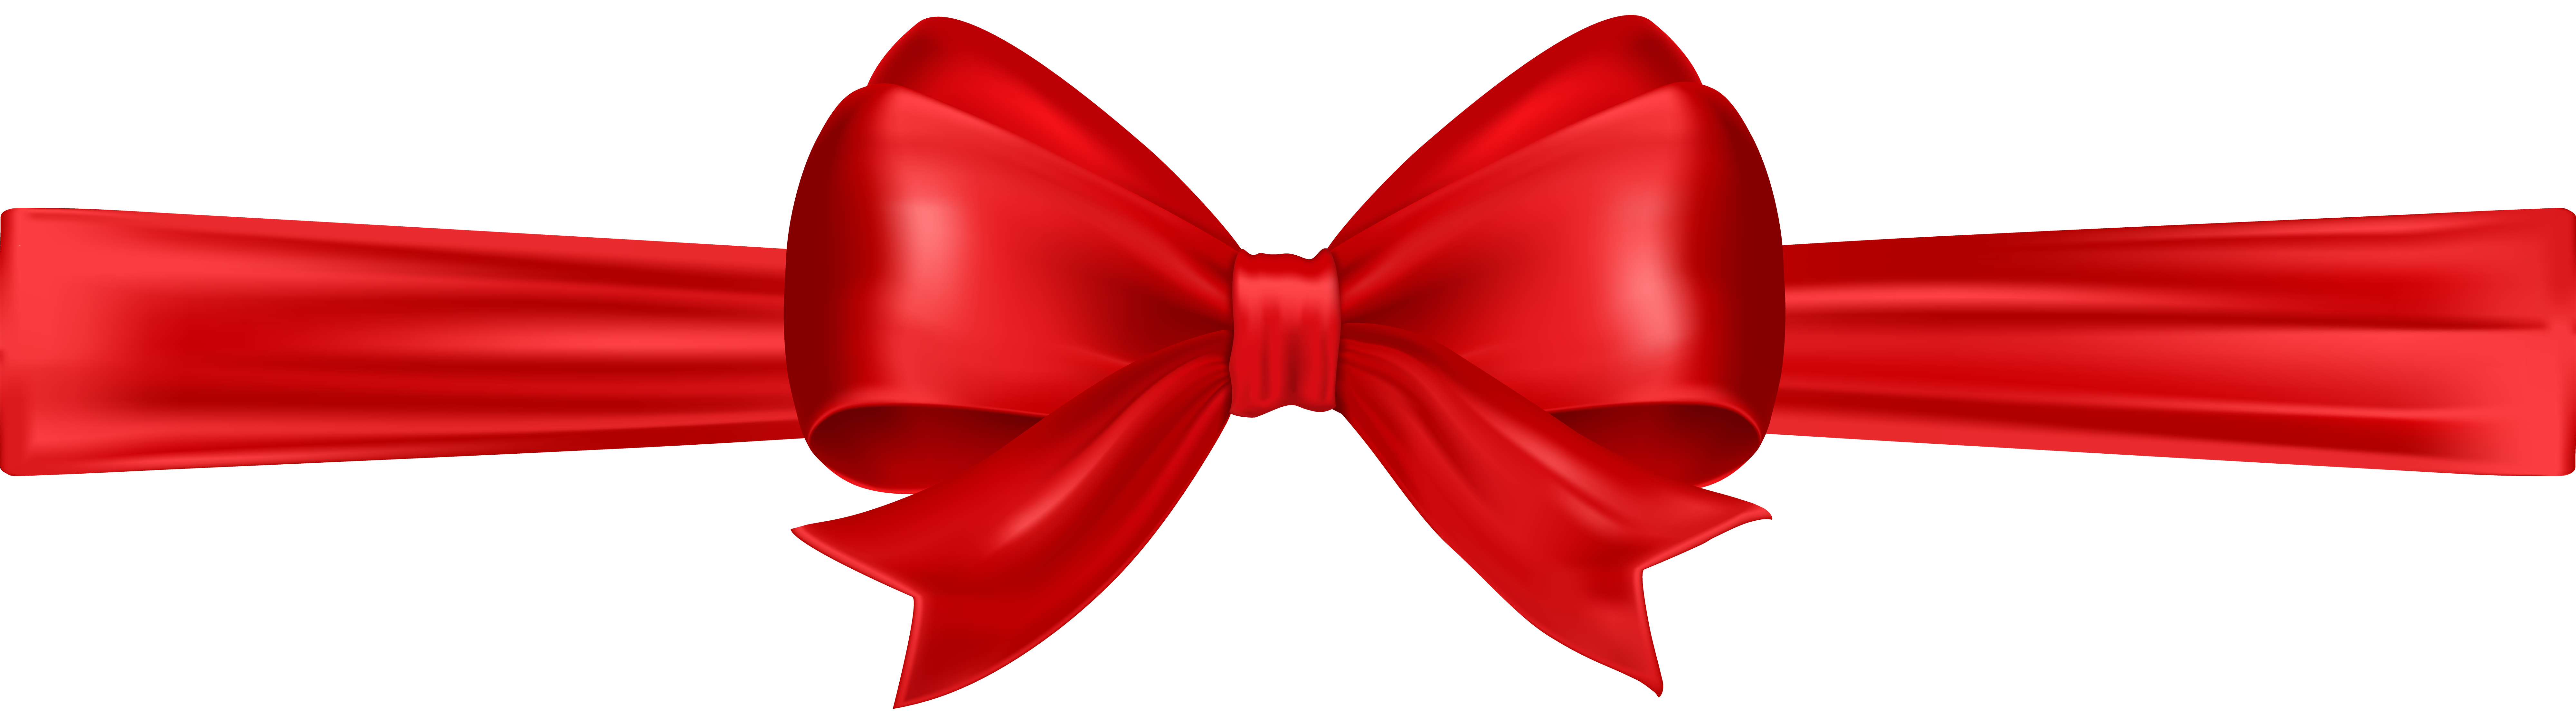 https://gallery.yopriceville.com/var/albums/Free-Clipart-Pictures/Ribbons-and-Banners-PNG/Red_Bow_Clip_Art_PNG_Image-832207696.png?m=1482033302